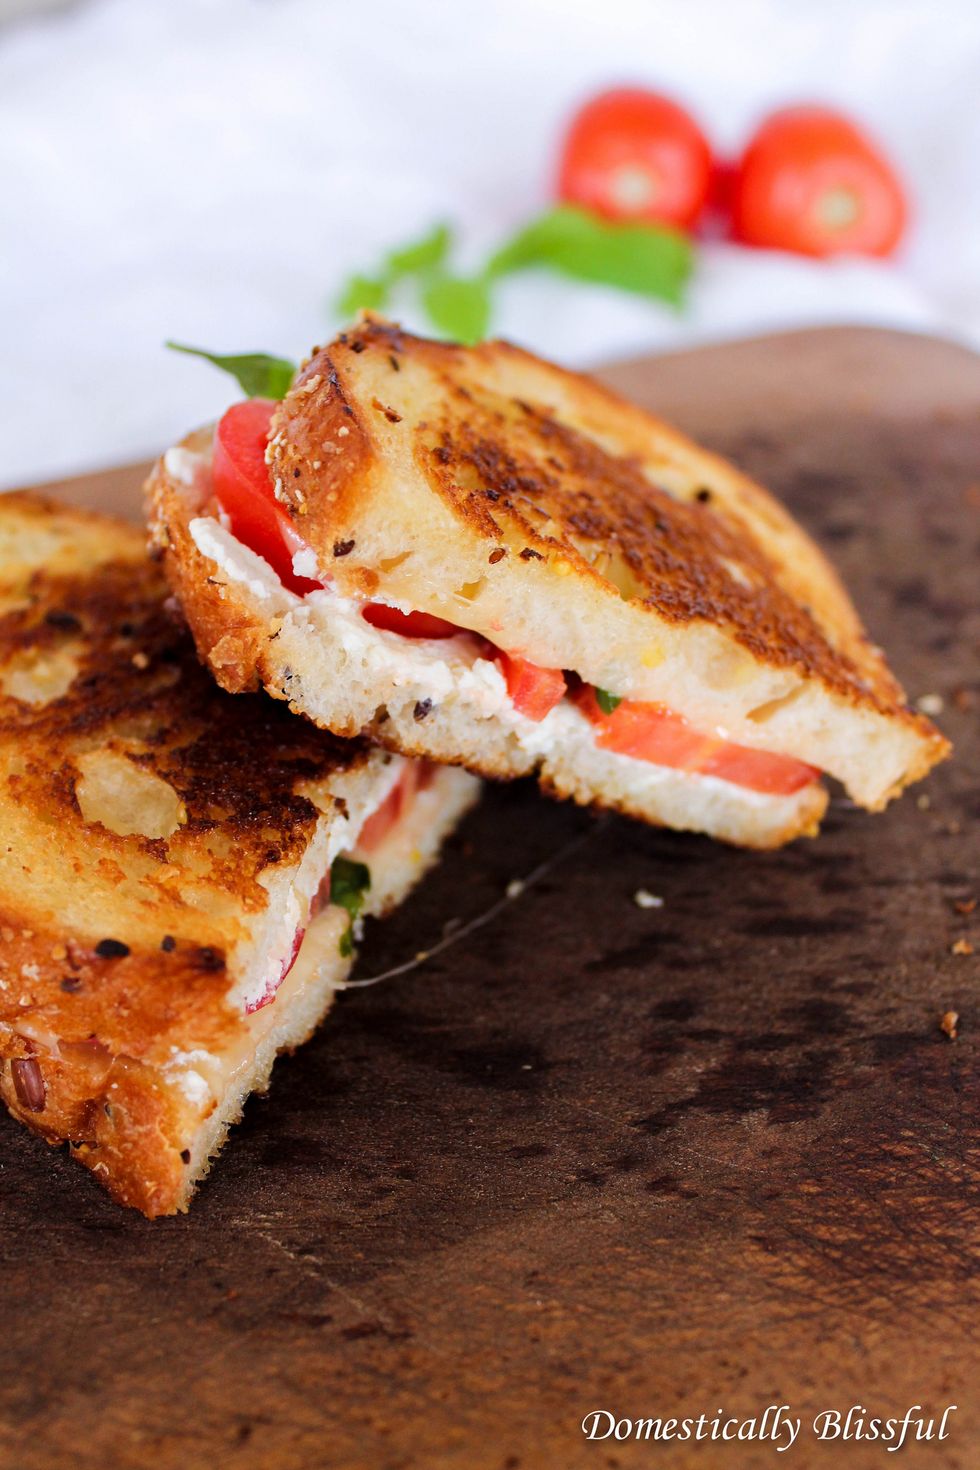 Budget Your Bite With This Quick Spinach Feta Grilled Cheese